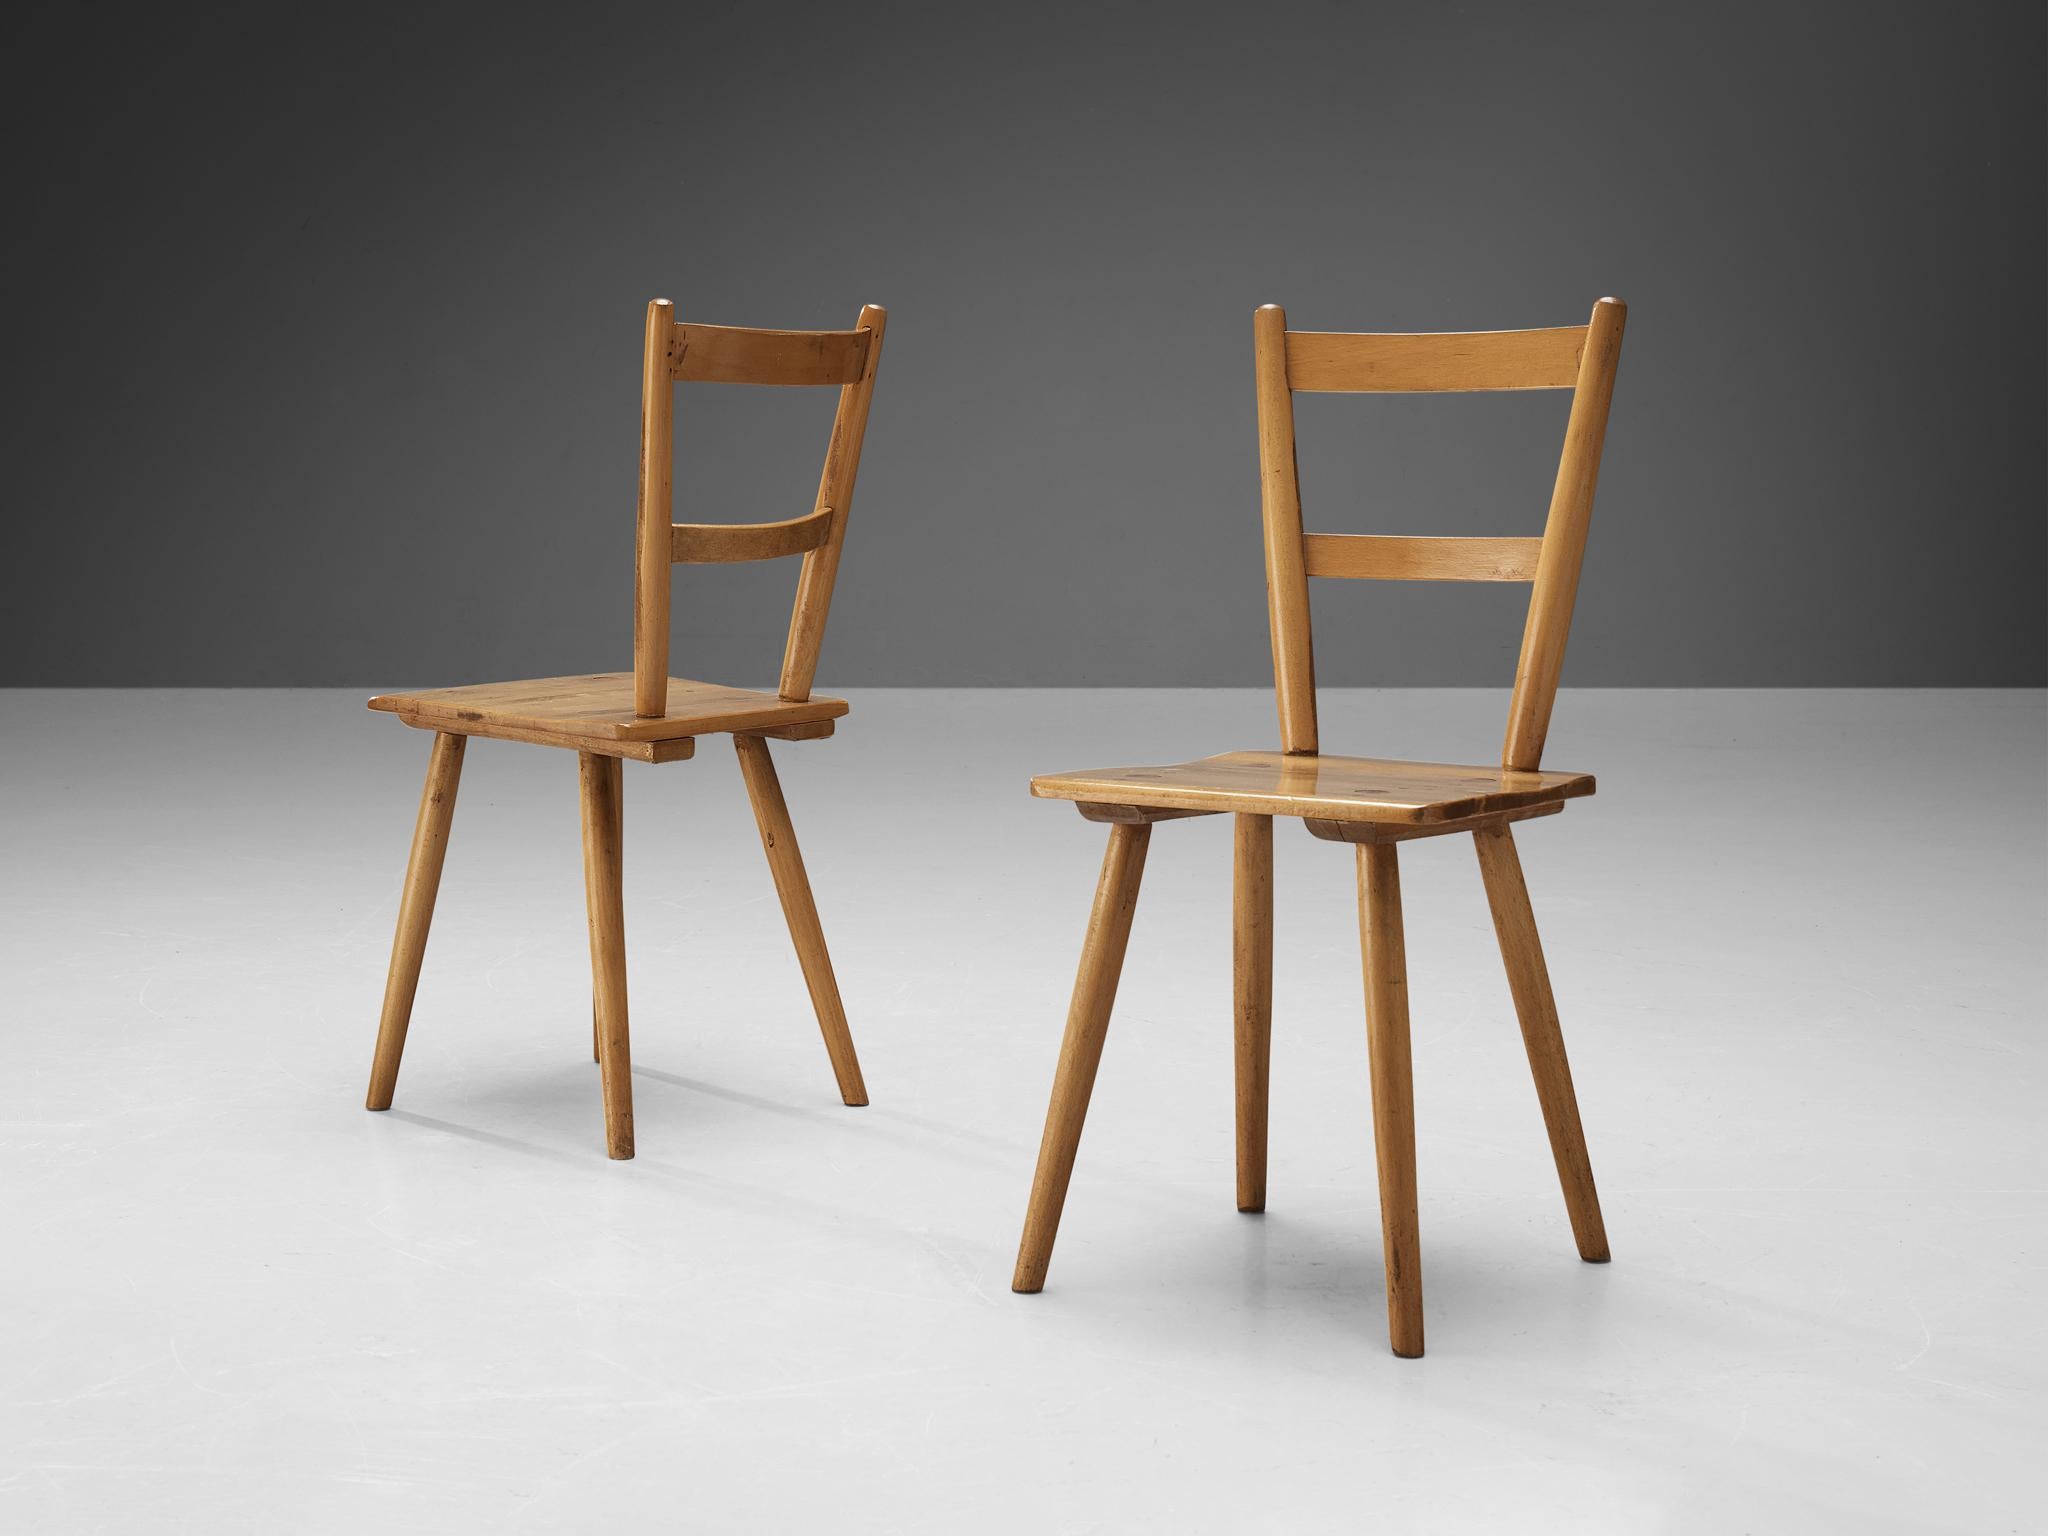 Dining chairs, beech, The Netherlands, 1960s. 

Pair of modest Dutch dining chairs. These modern chairs resemble the style of the designs by the British furniture manufacturer Ercol. These Puritan, simplistic chairs with two horizontal slats contain